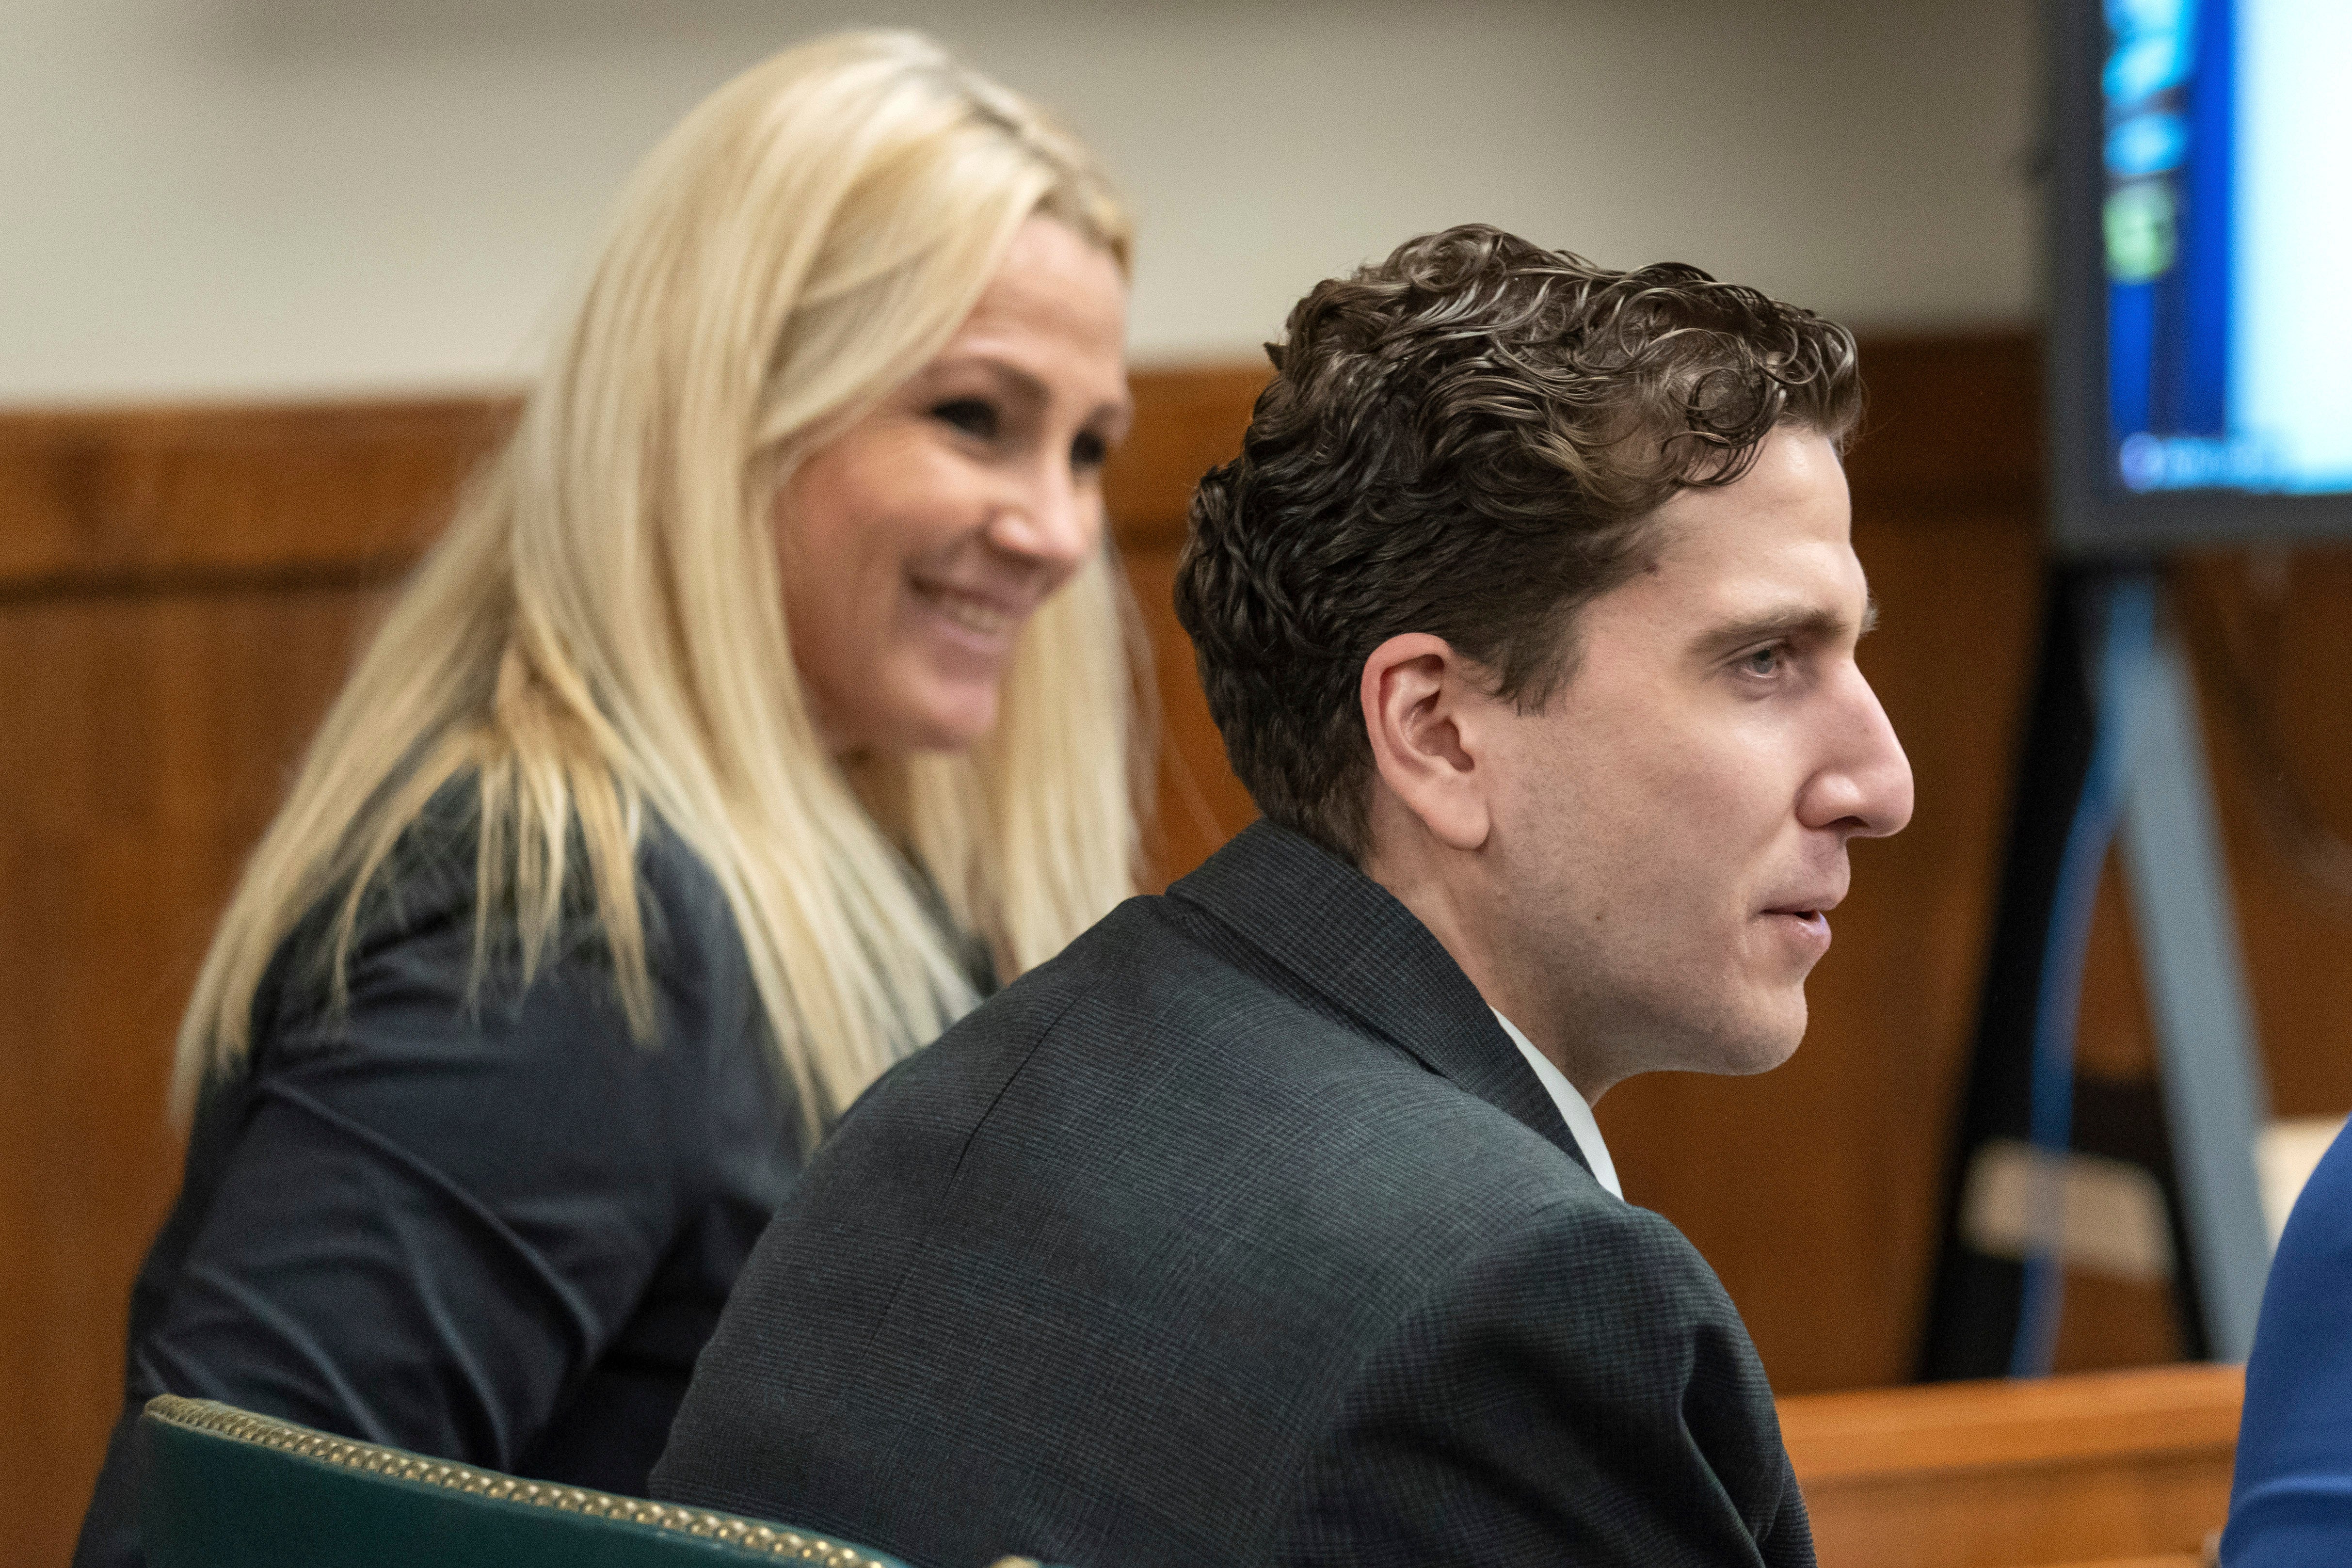 Bryan Kohberger, right, who is accused of killing four University of Idaho students in November 2022, sits with Anne Taylor, left, one of his attorneys, during a hearing in Latah County District Court, Wednesday, Sept. 13, 2023, in Moscow, Idaho.